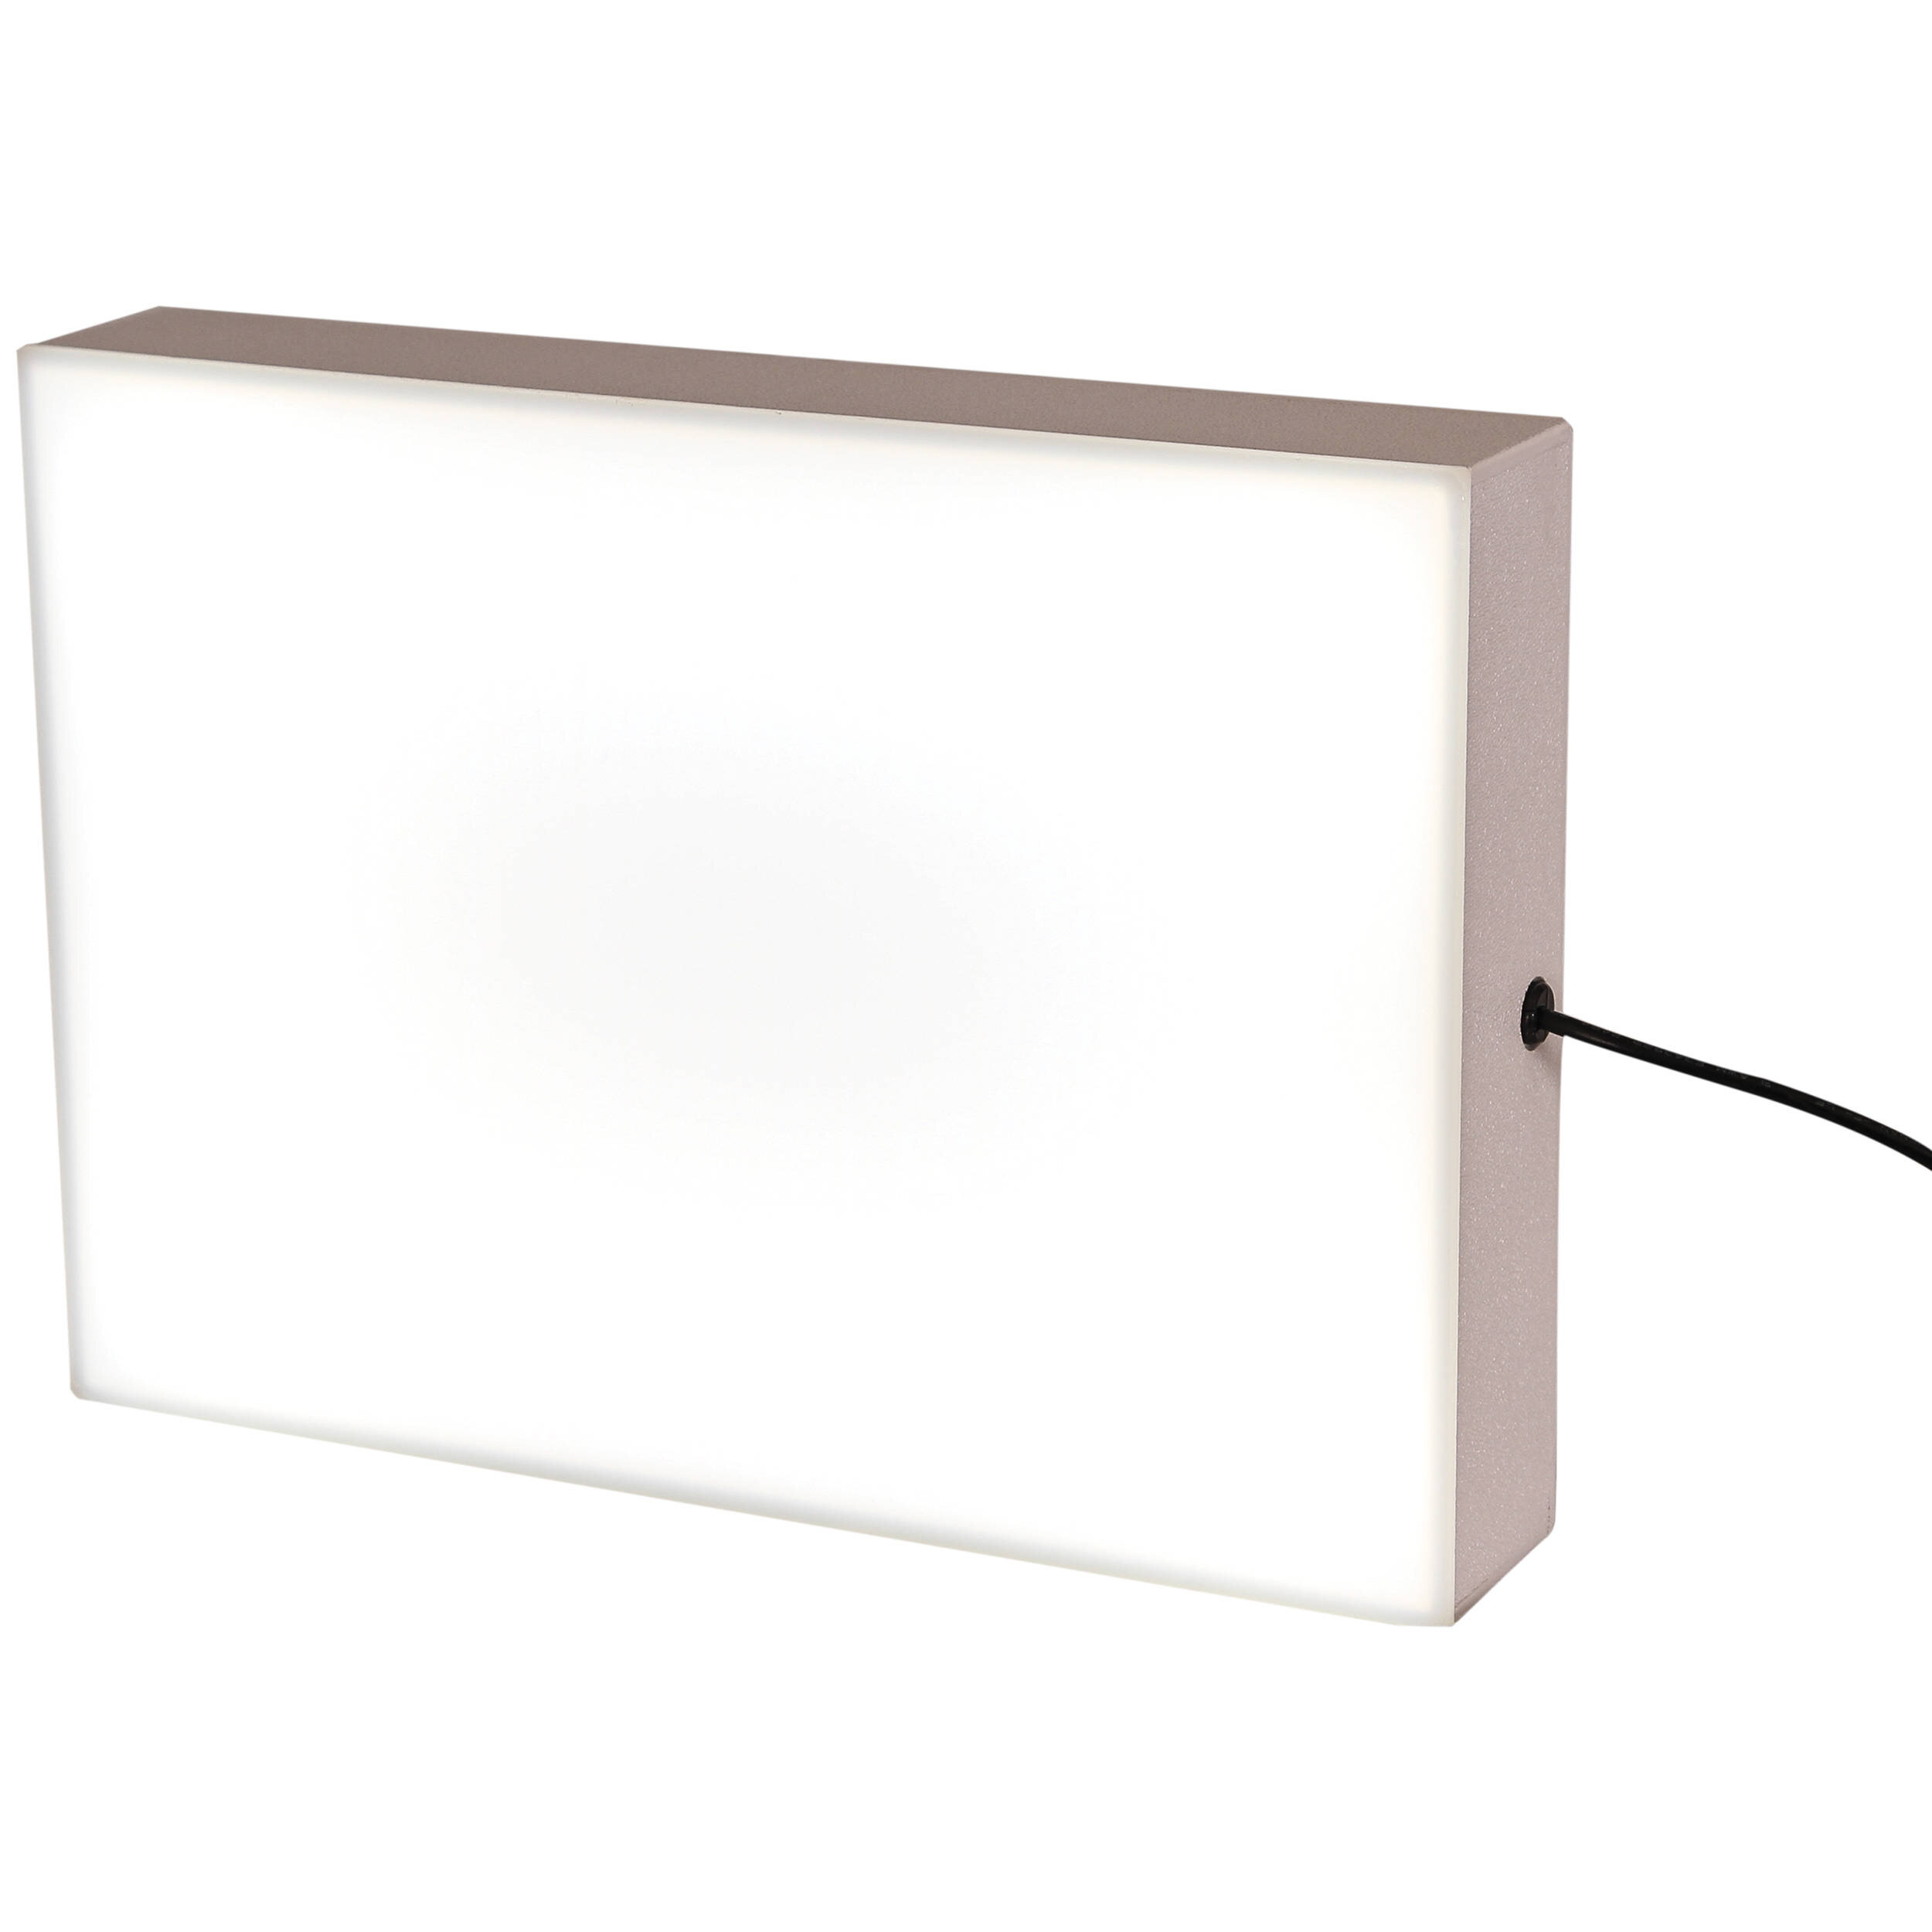 Porta-Trace LED Light Table 24 x 36 with Stand